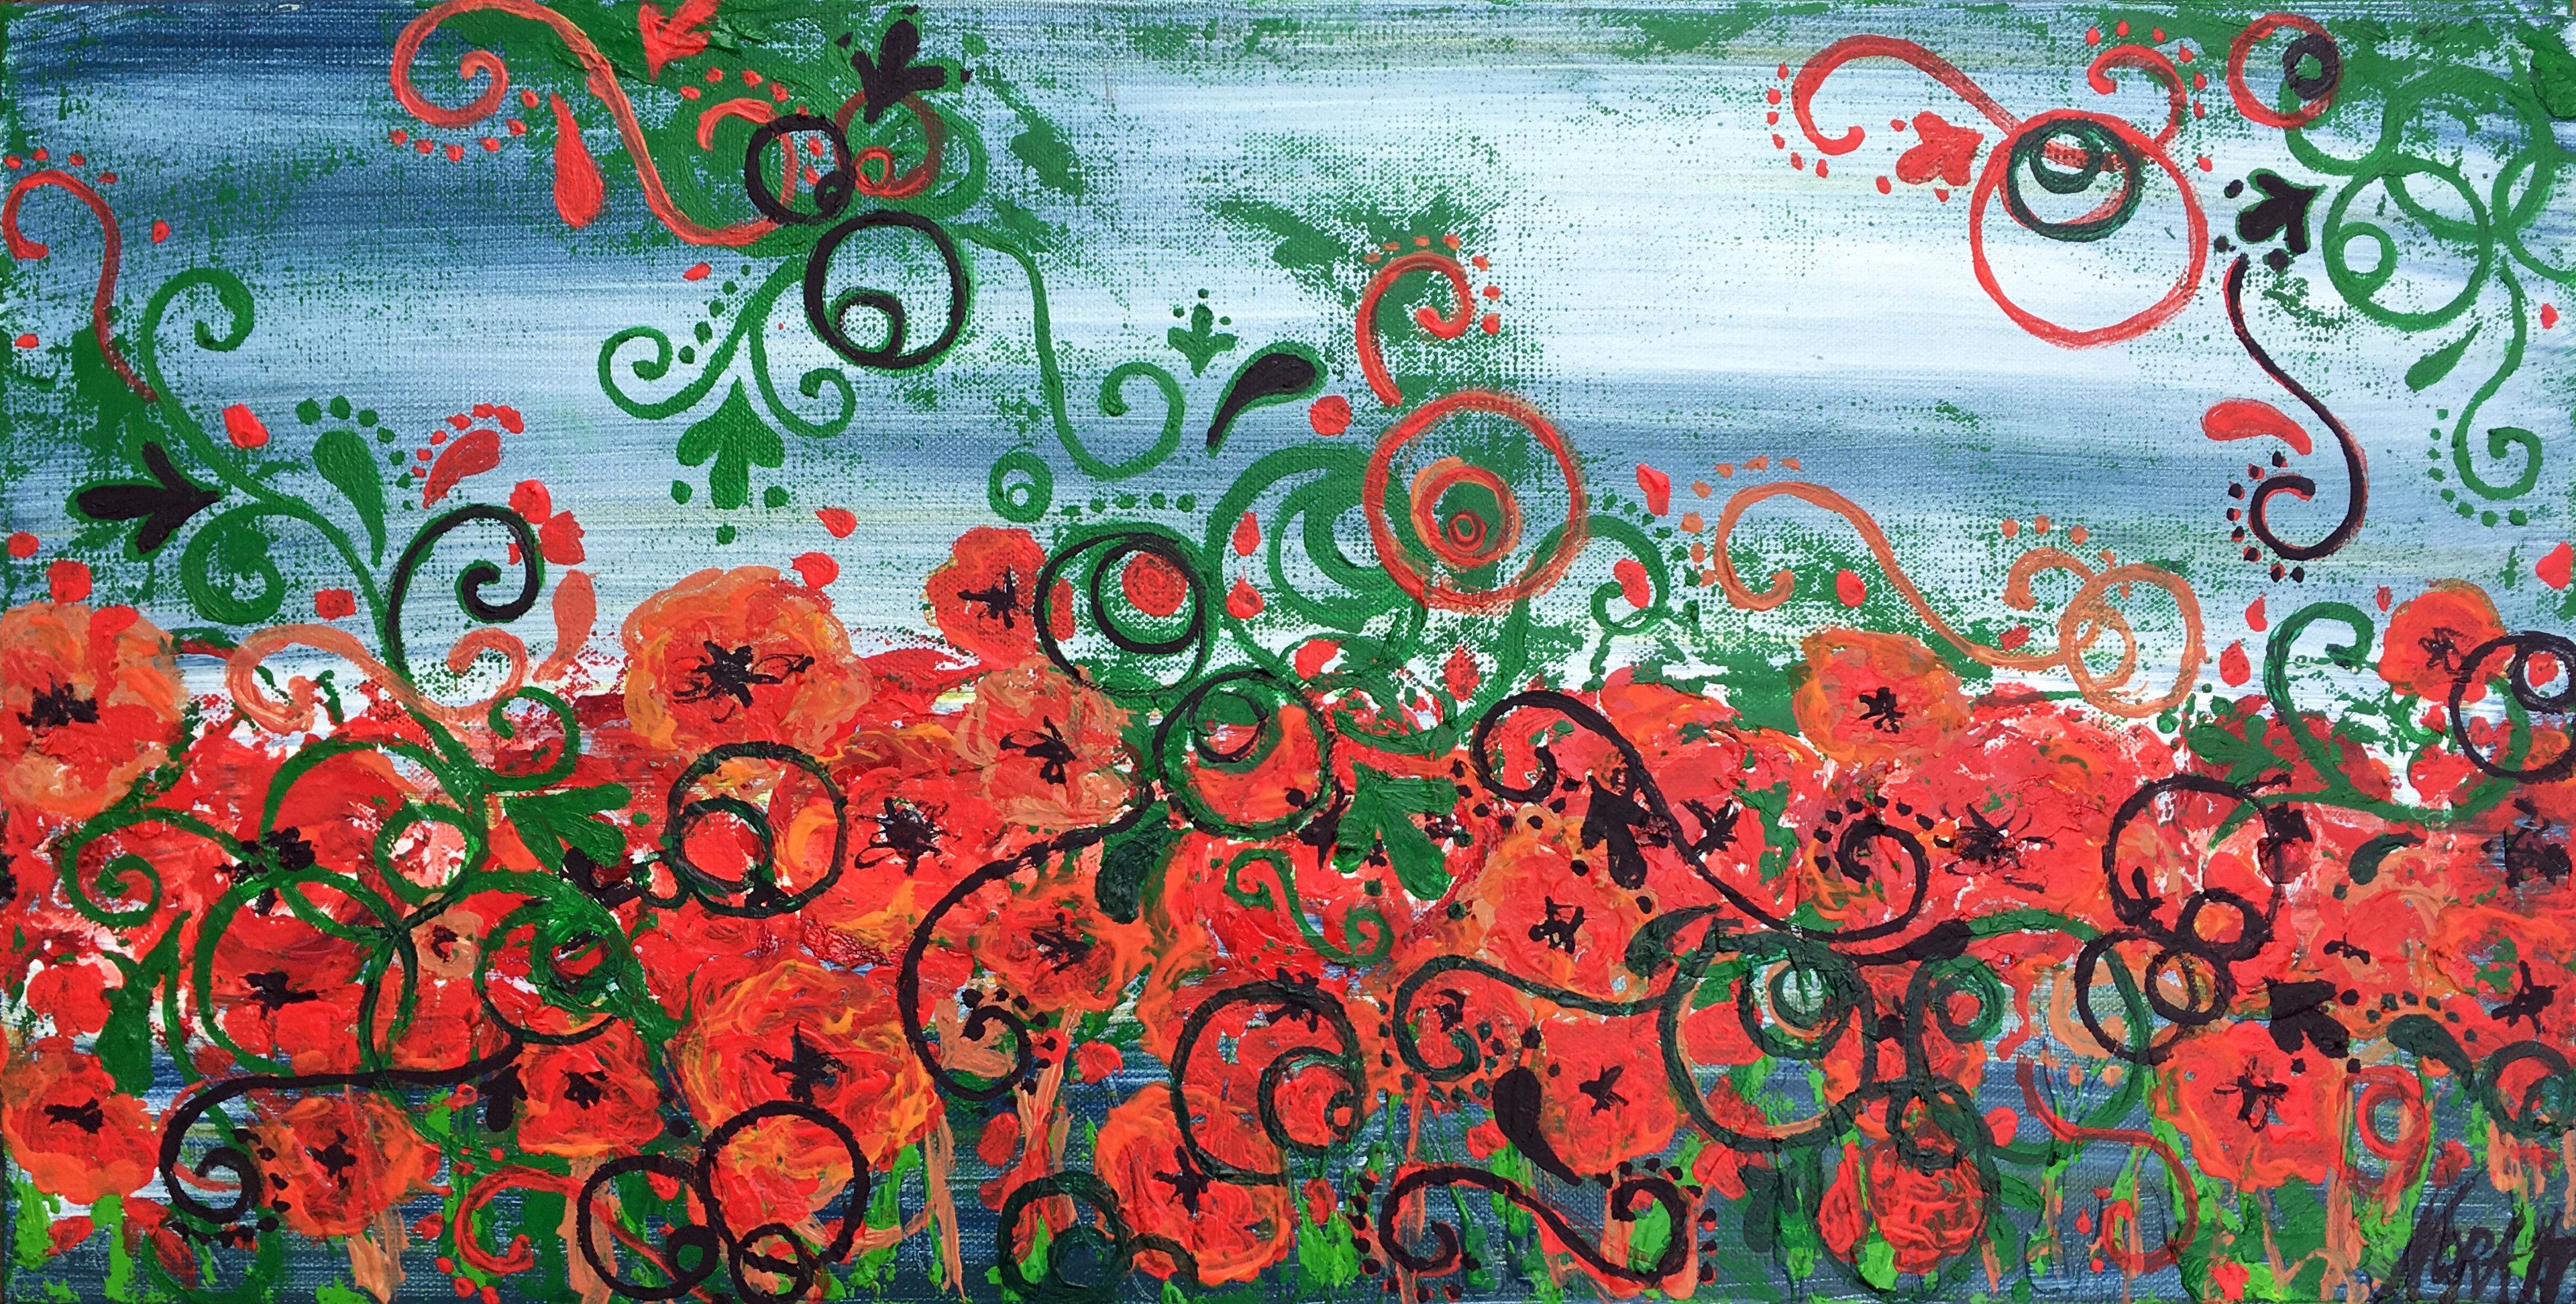 Nora Franko; Red Poppies In Eccentric Field, 2015, Original Painting Oil, 24 x 12 inches. Artwork description: 241 Original Oil Painting on Gallery Wrapped Canvas. The storm just pasted on the battle field. Row on Rowsee the past. ...